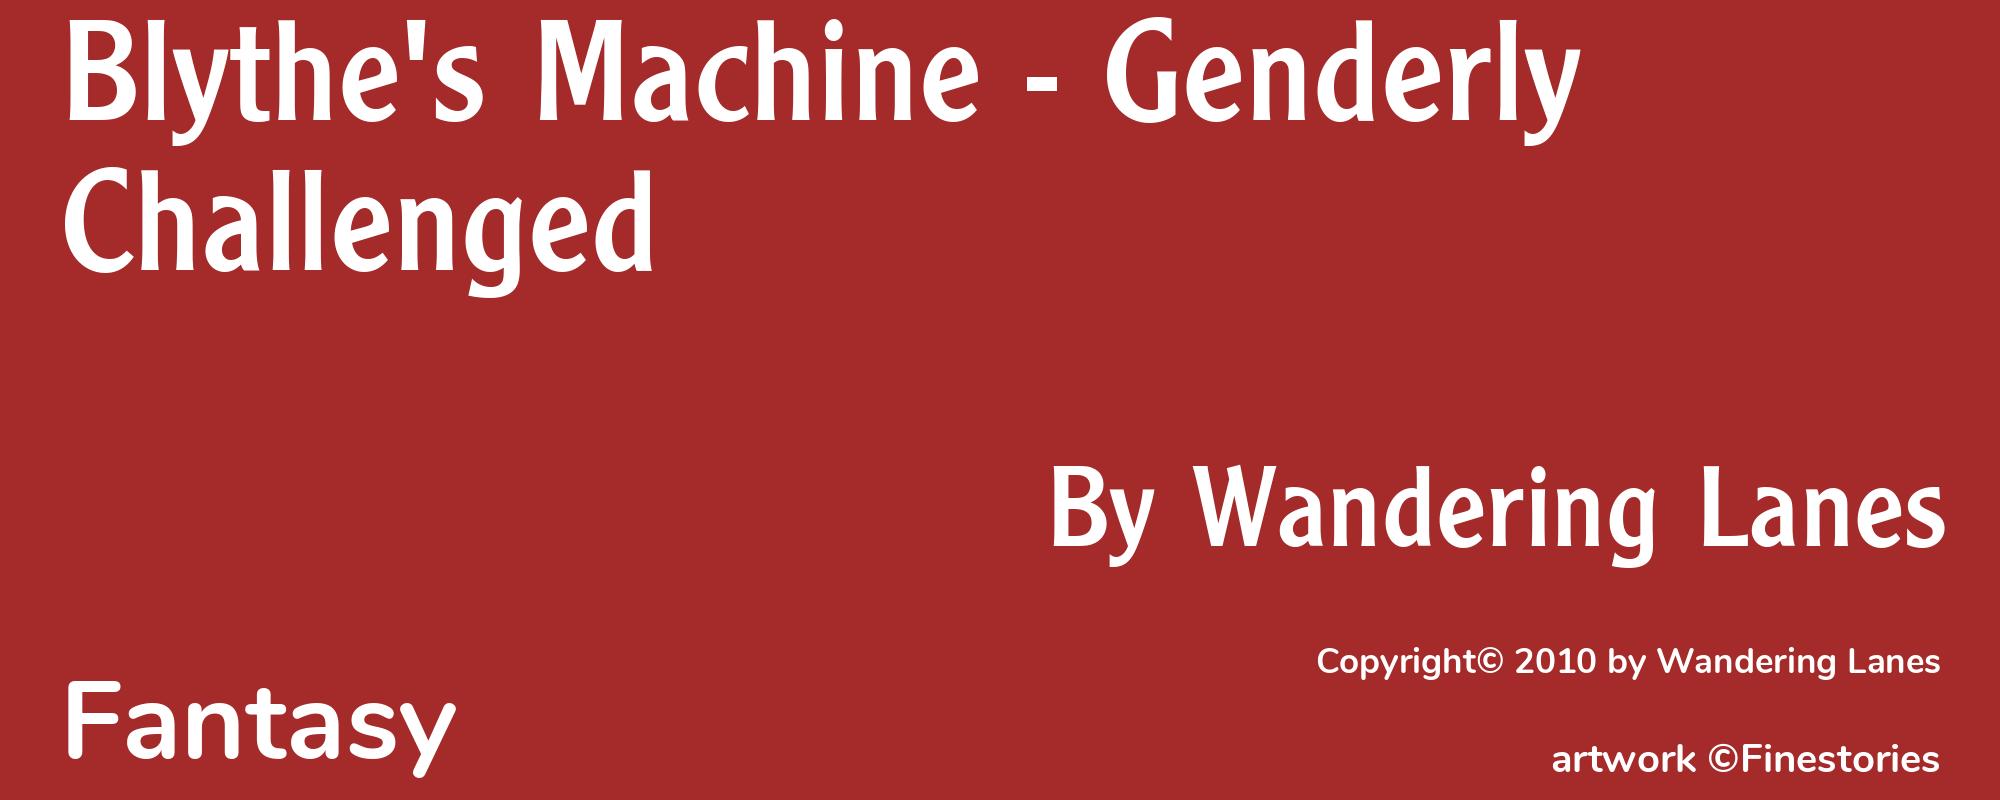 Blythe's Machine - Genderly Challenged - Cover